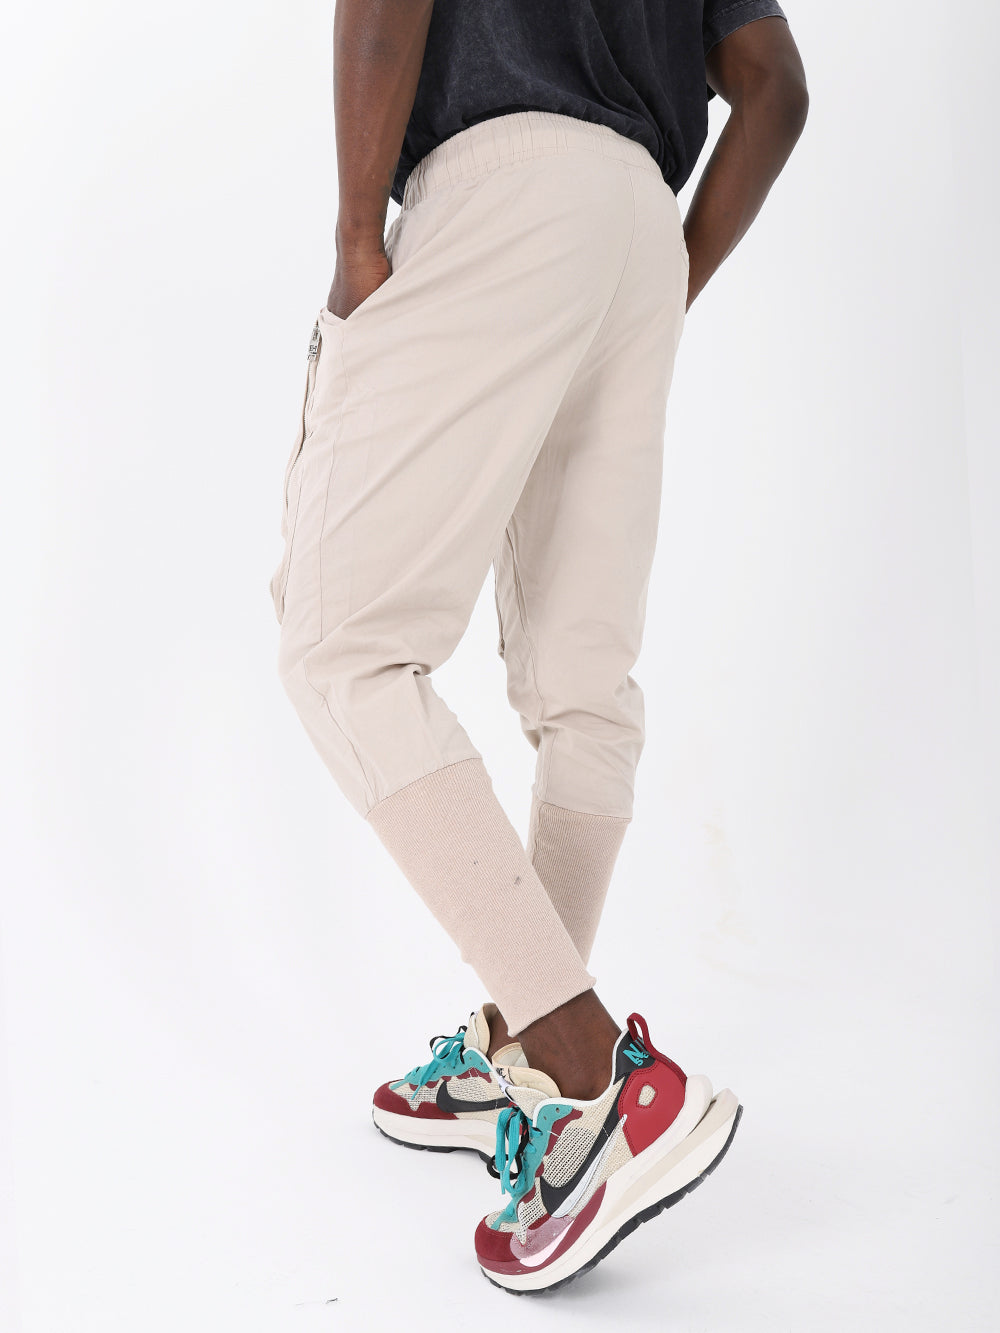 A man wearing ALTIS JOGGERS with an adjustable drawstring waist and black sneakers.